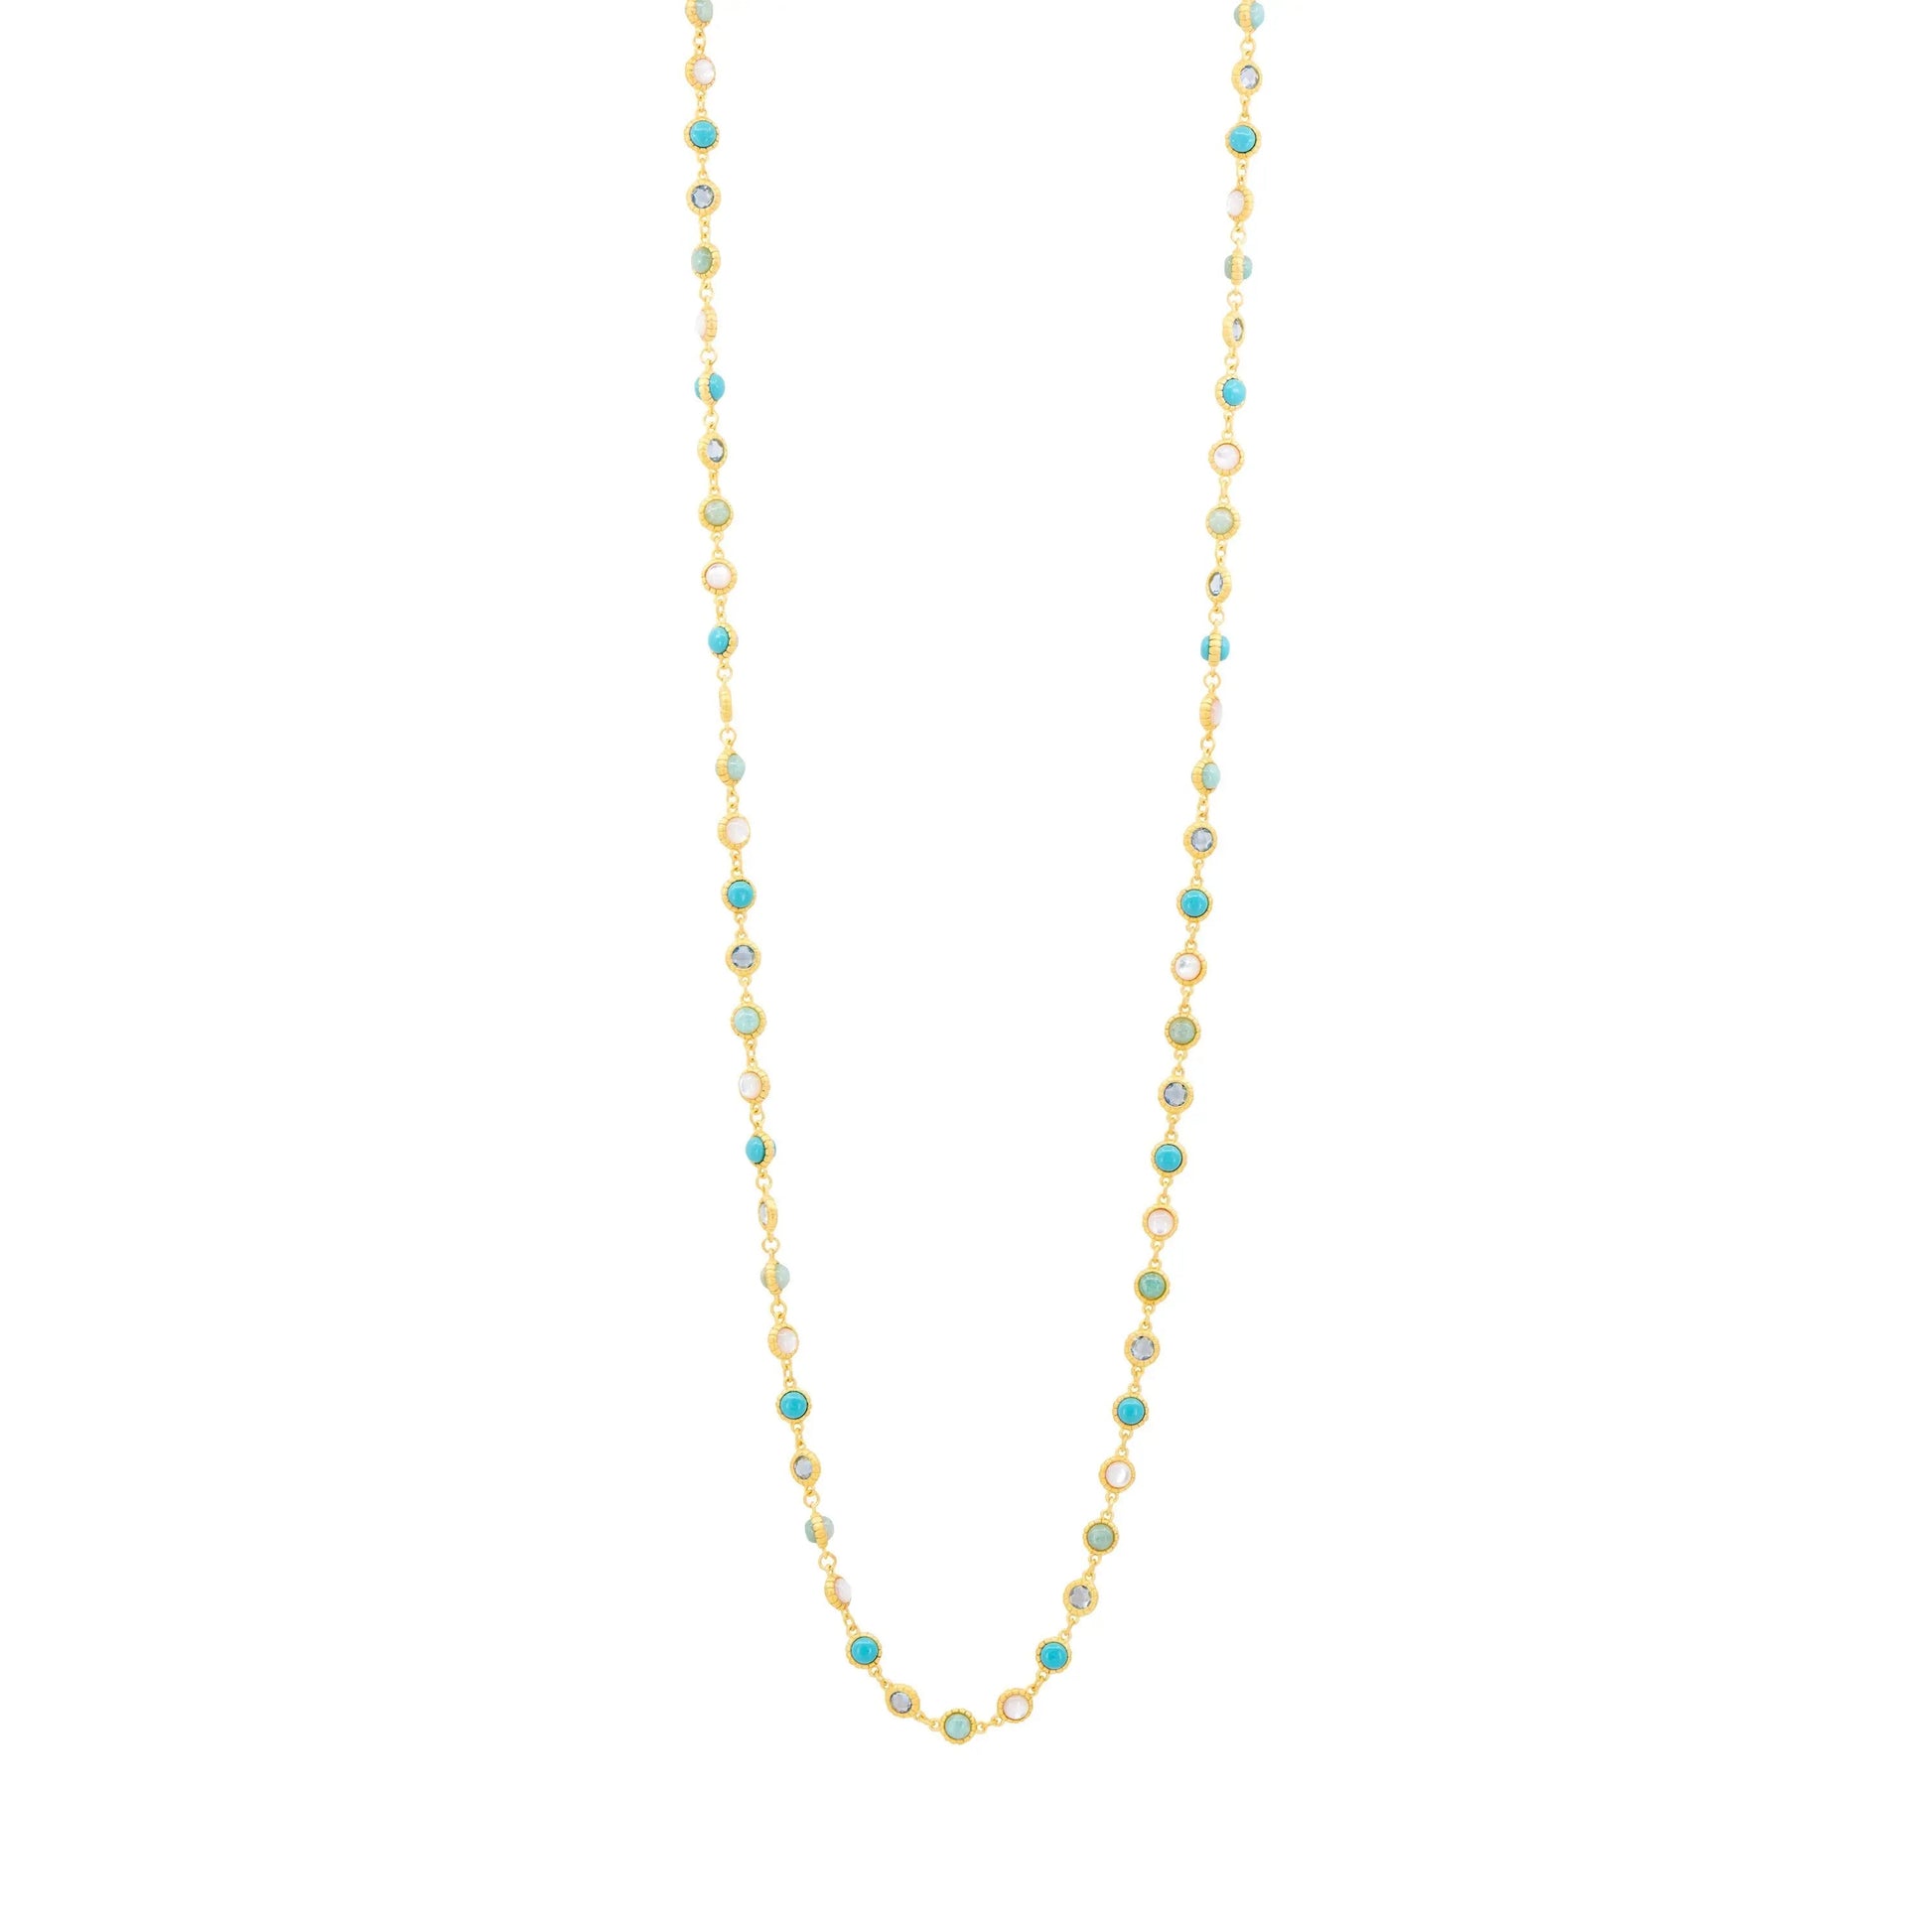  Sparkling Coast Long Chain Necklace Brooklyn Coast NECKLACE